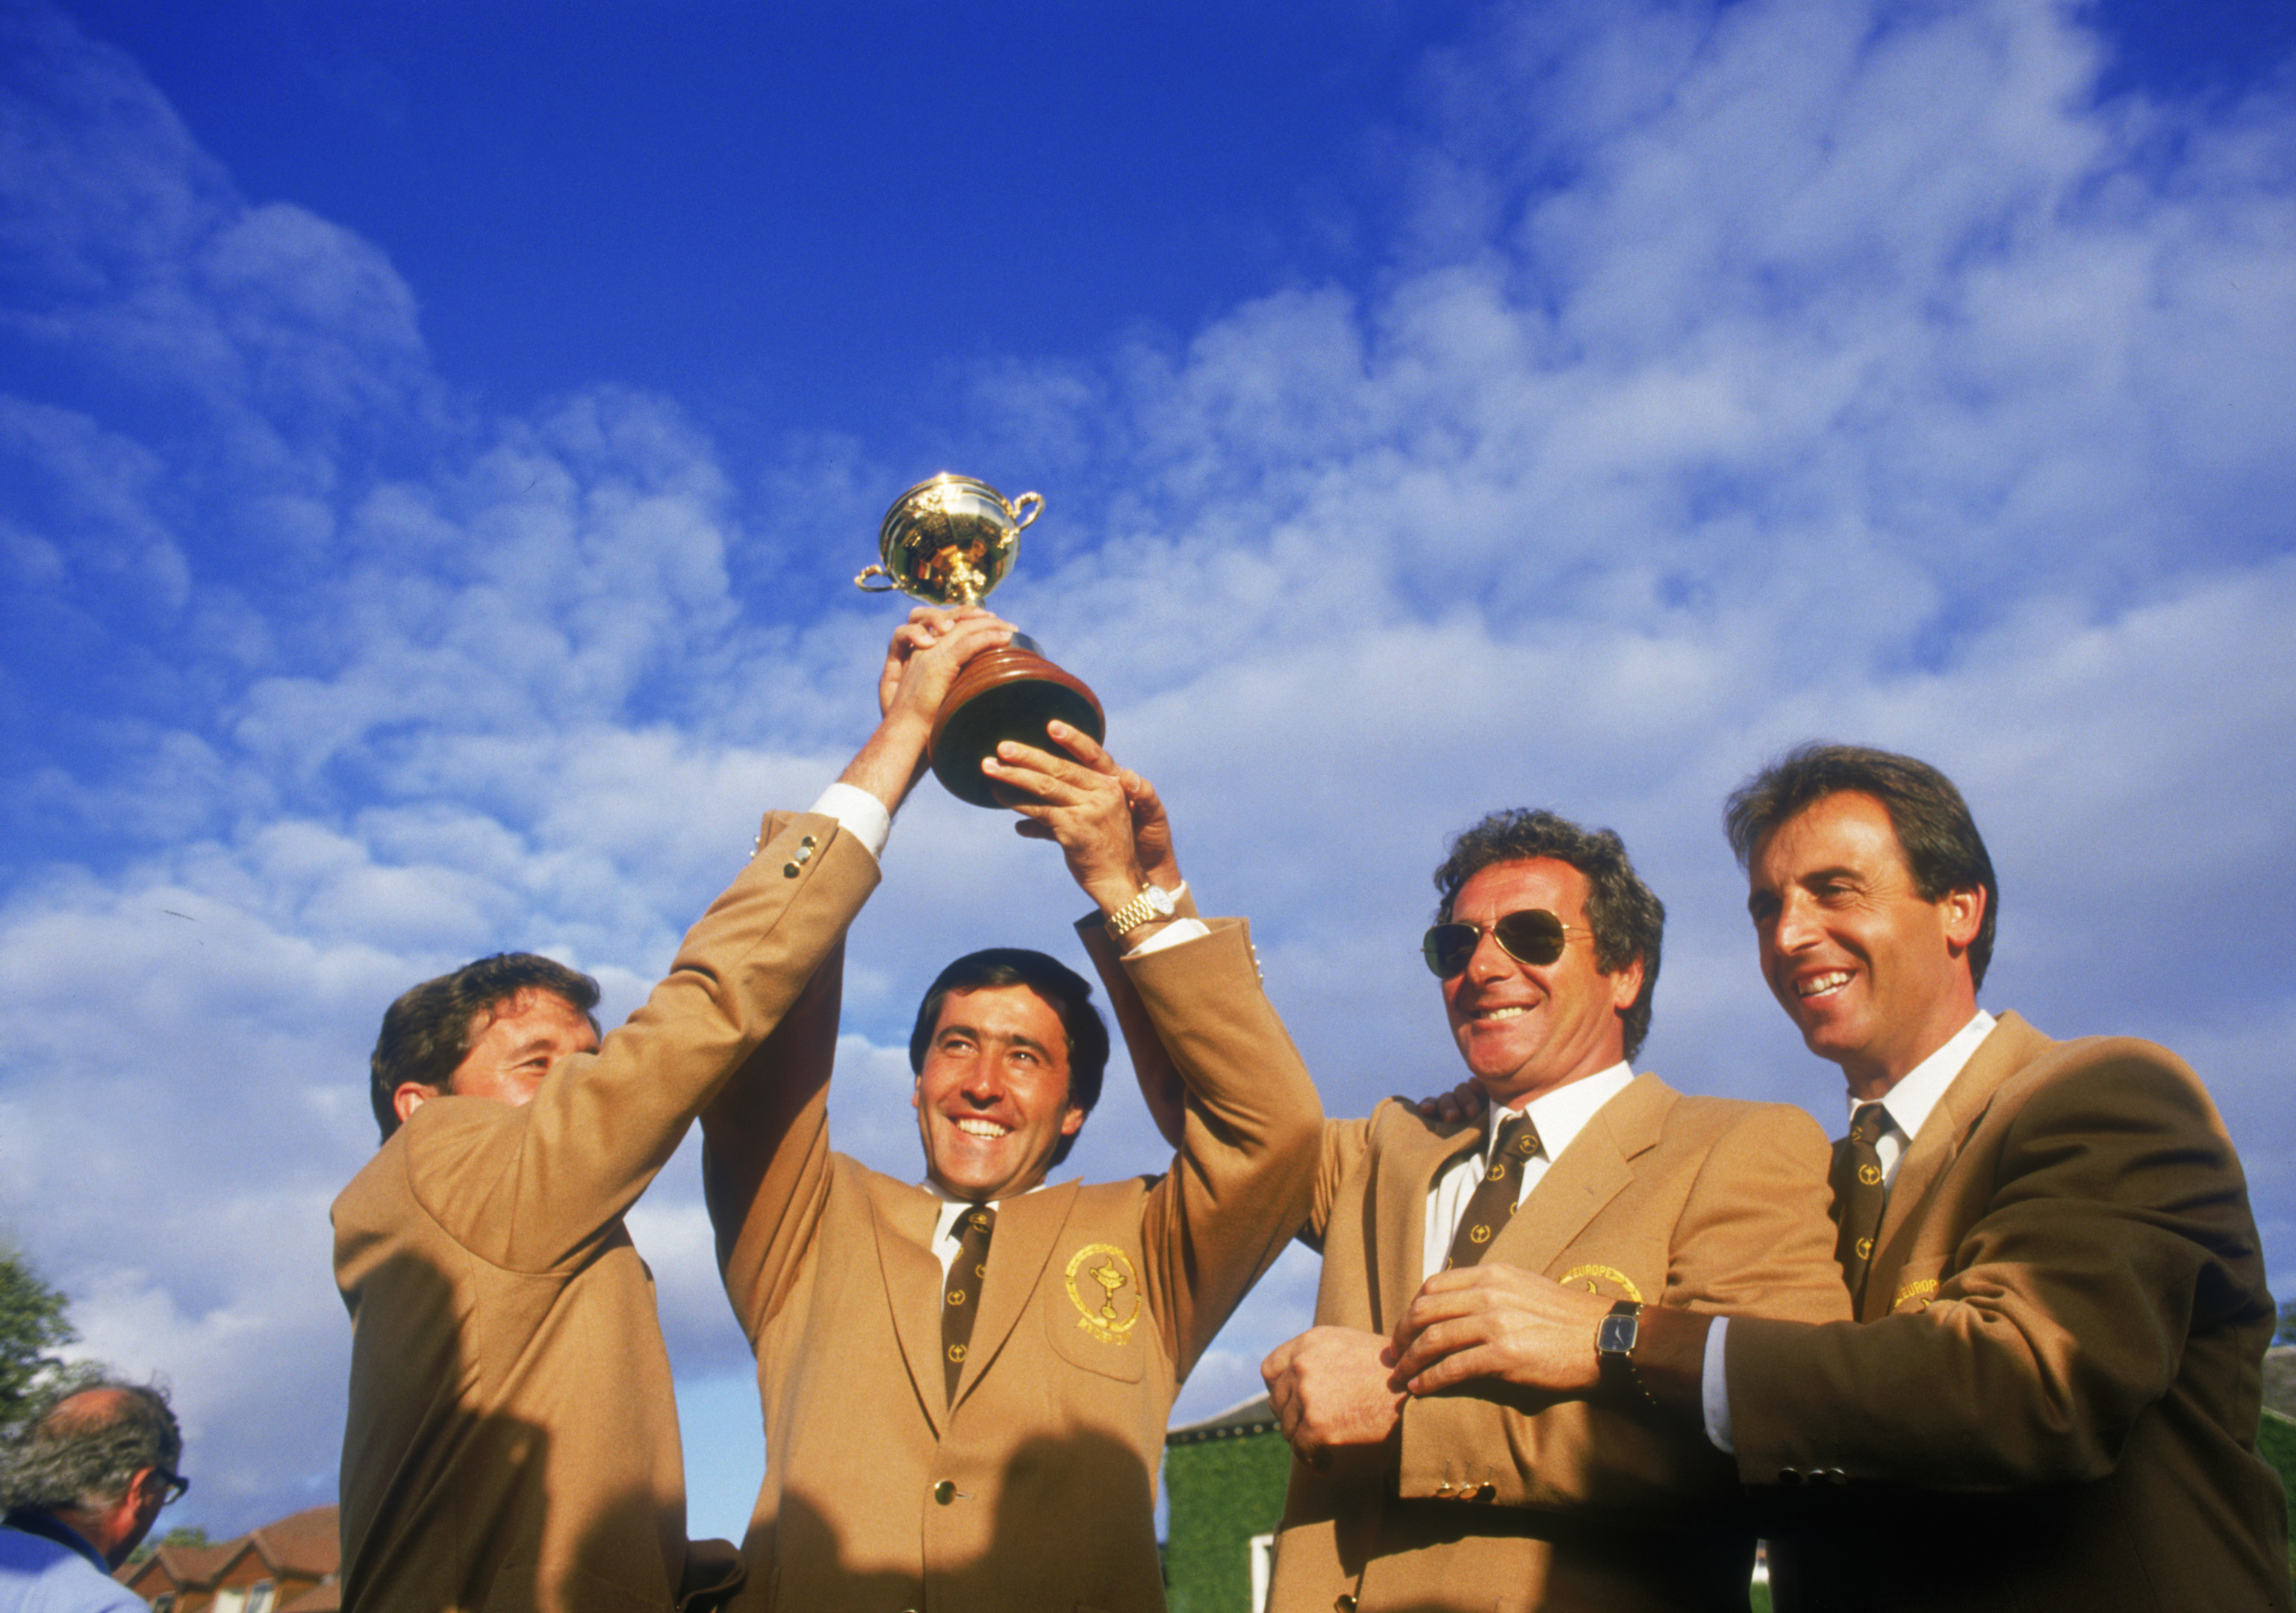 Spanish golfers Severiano Ballesteros, Manuel Pinero, Jose Maria Canizares and Jose Rivero of the European team win the Ryder Cup at The Belfry in Wishaw, Warwickshire, September 1985. (Getty Images)